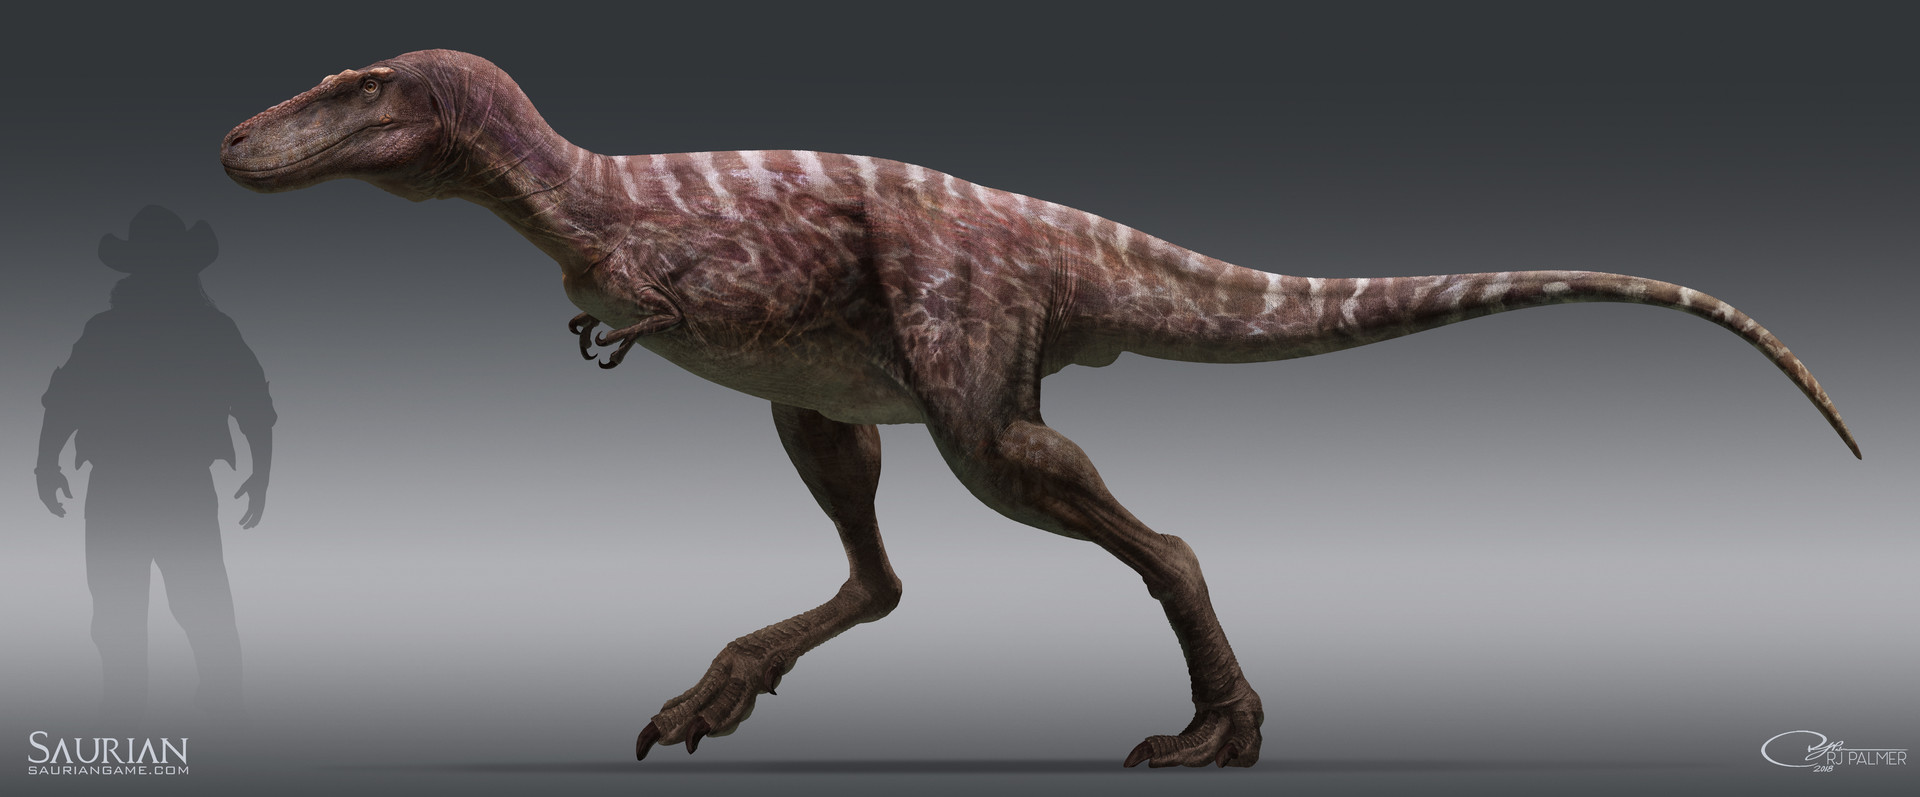 RJ Palmer - Saurian T. rex Life stages